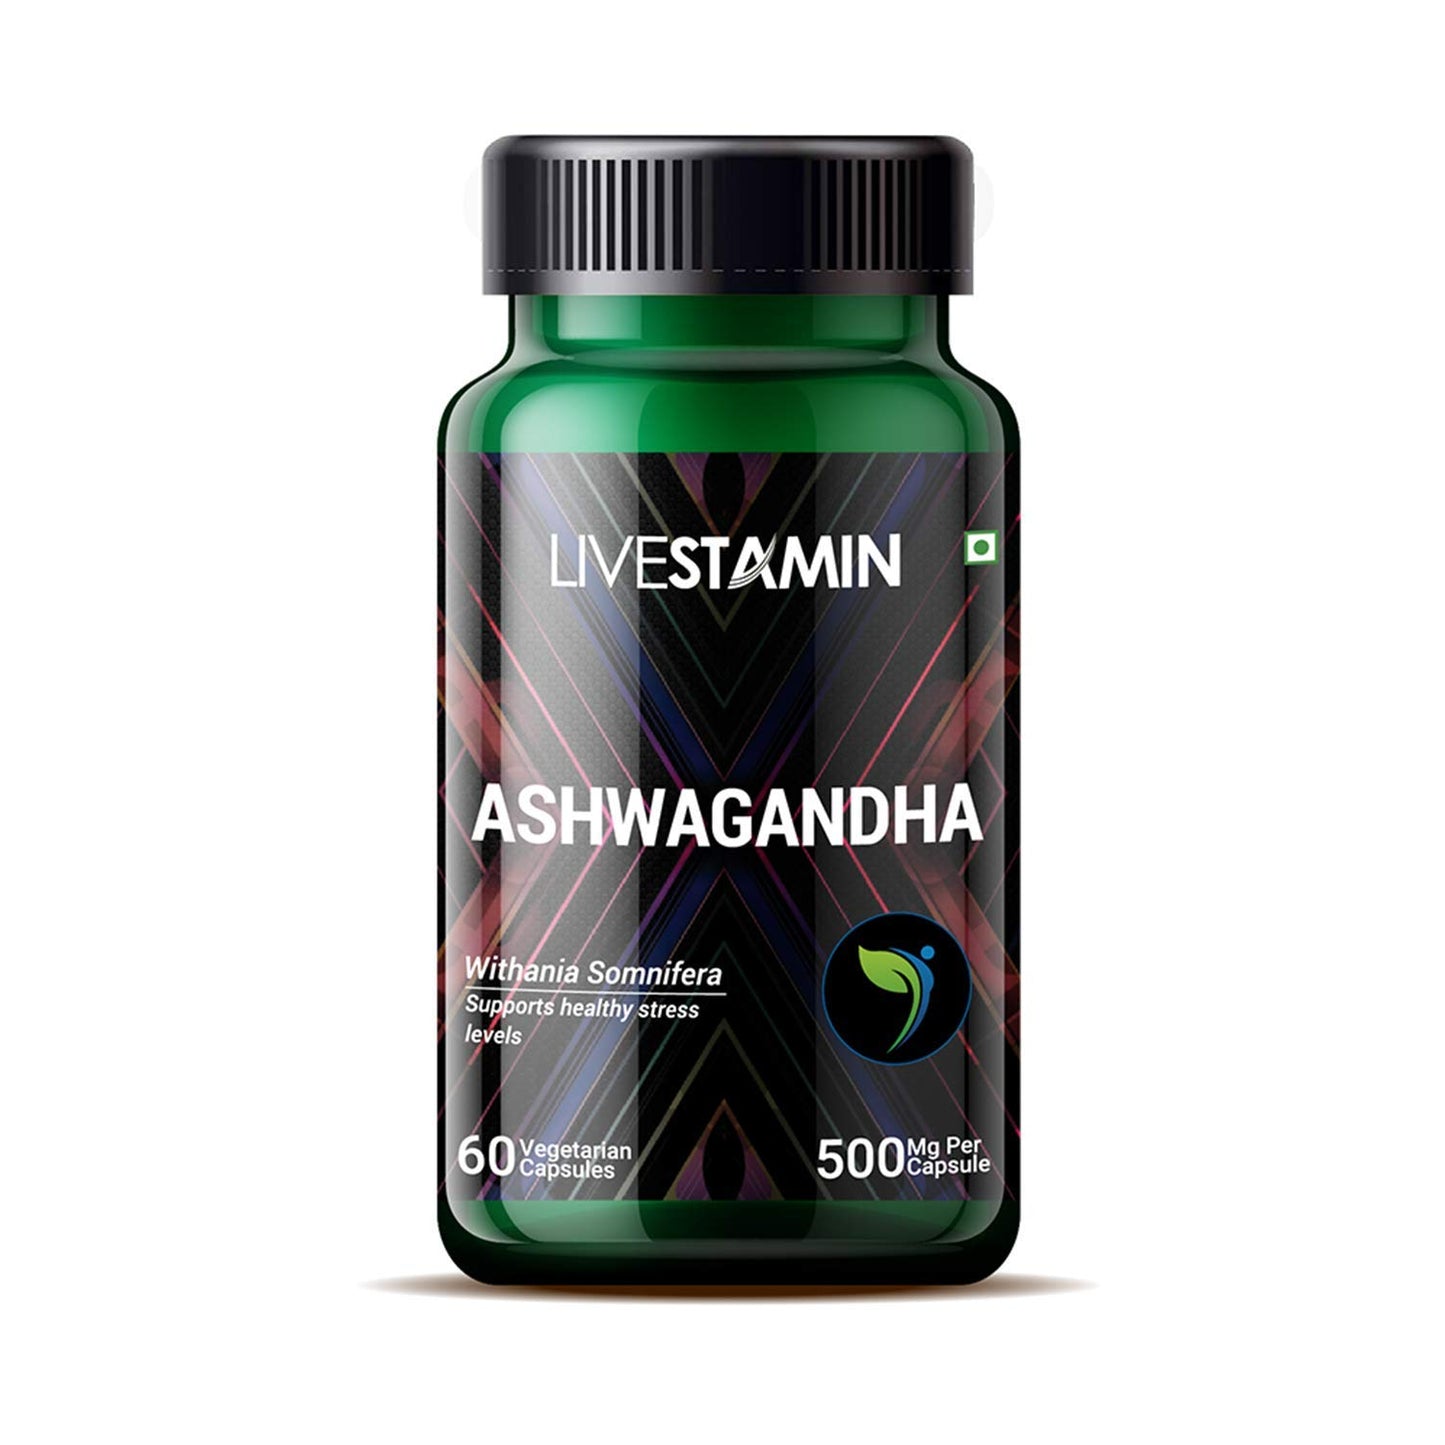 Livestamin Ashwagandha Extract Supplement (Withanolides >7%) 500 mg - 60 Vegetarian Capsules